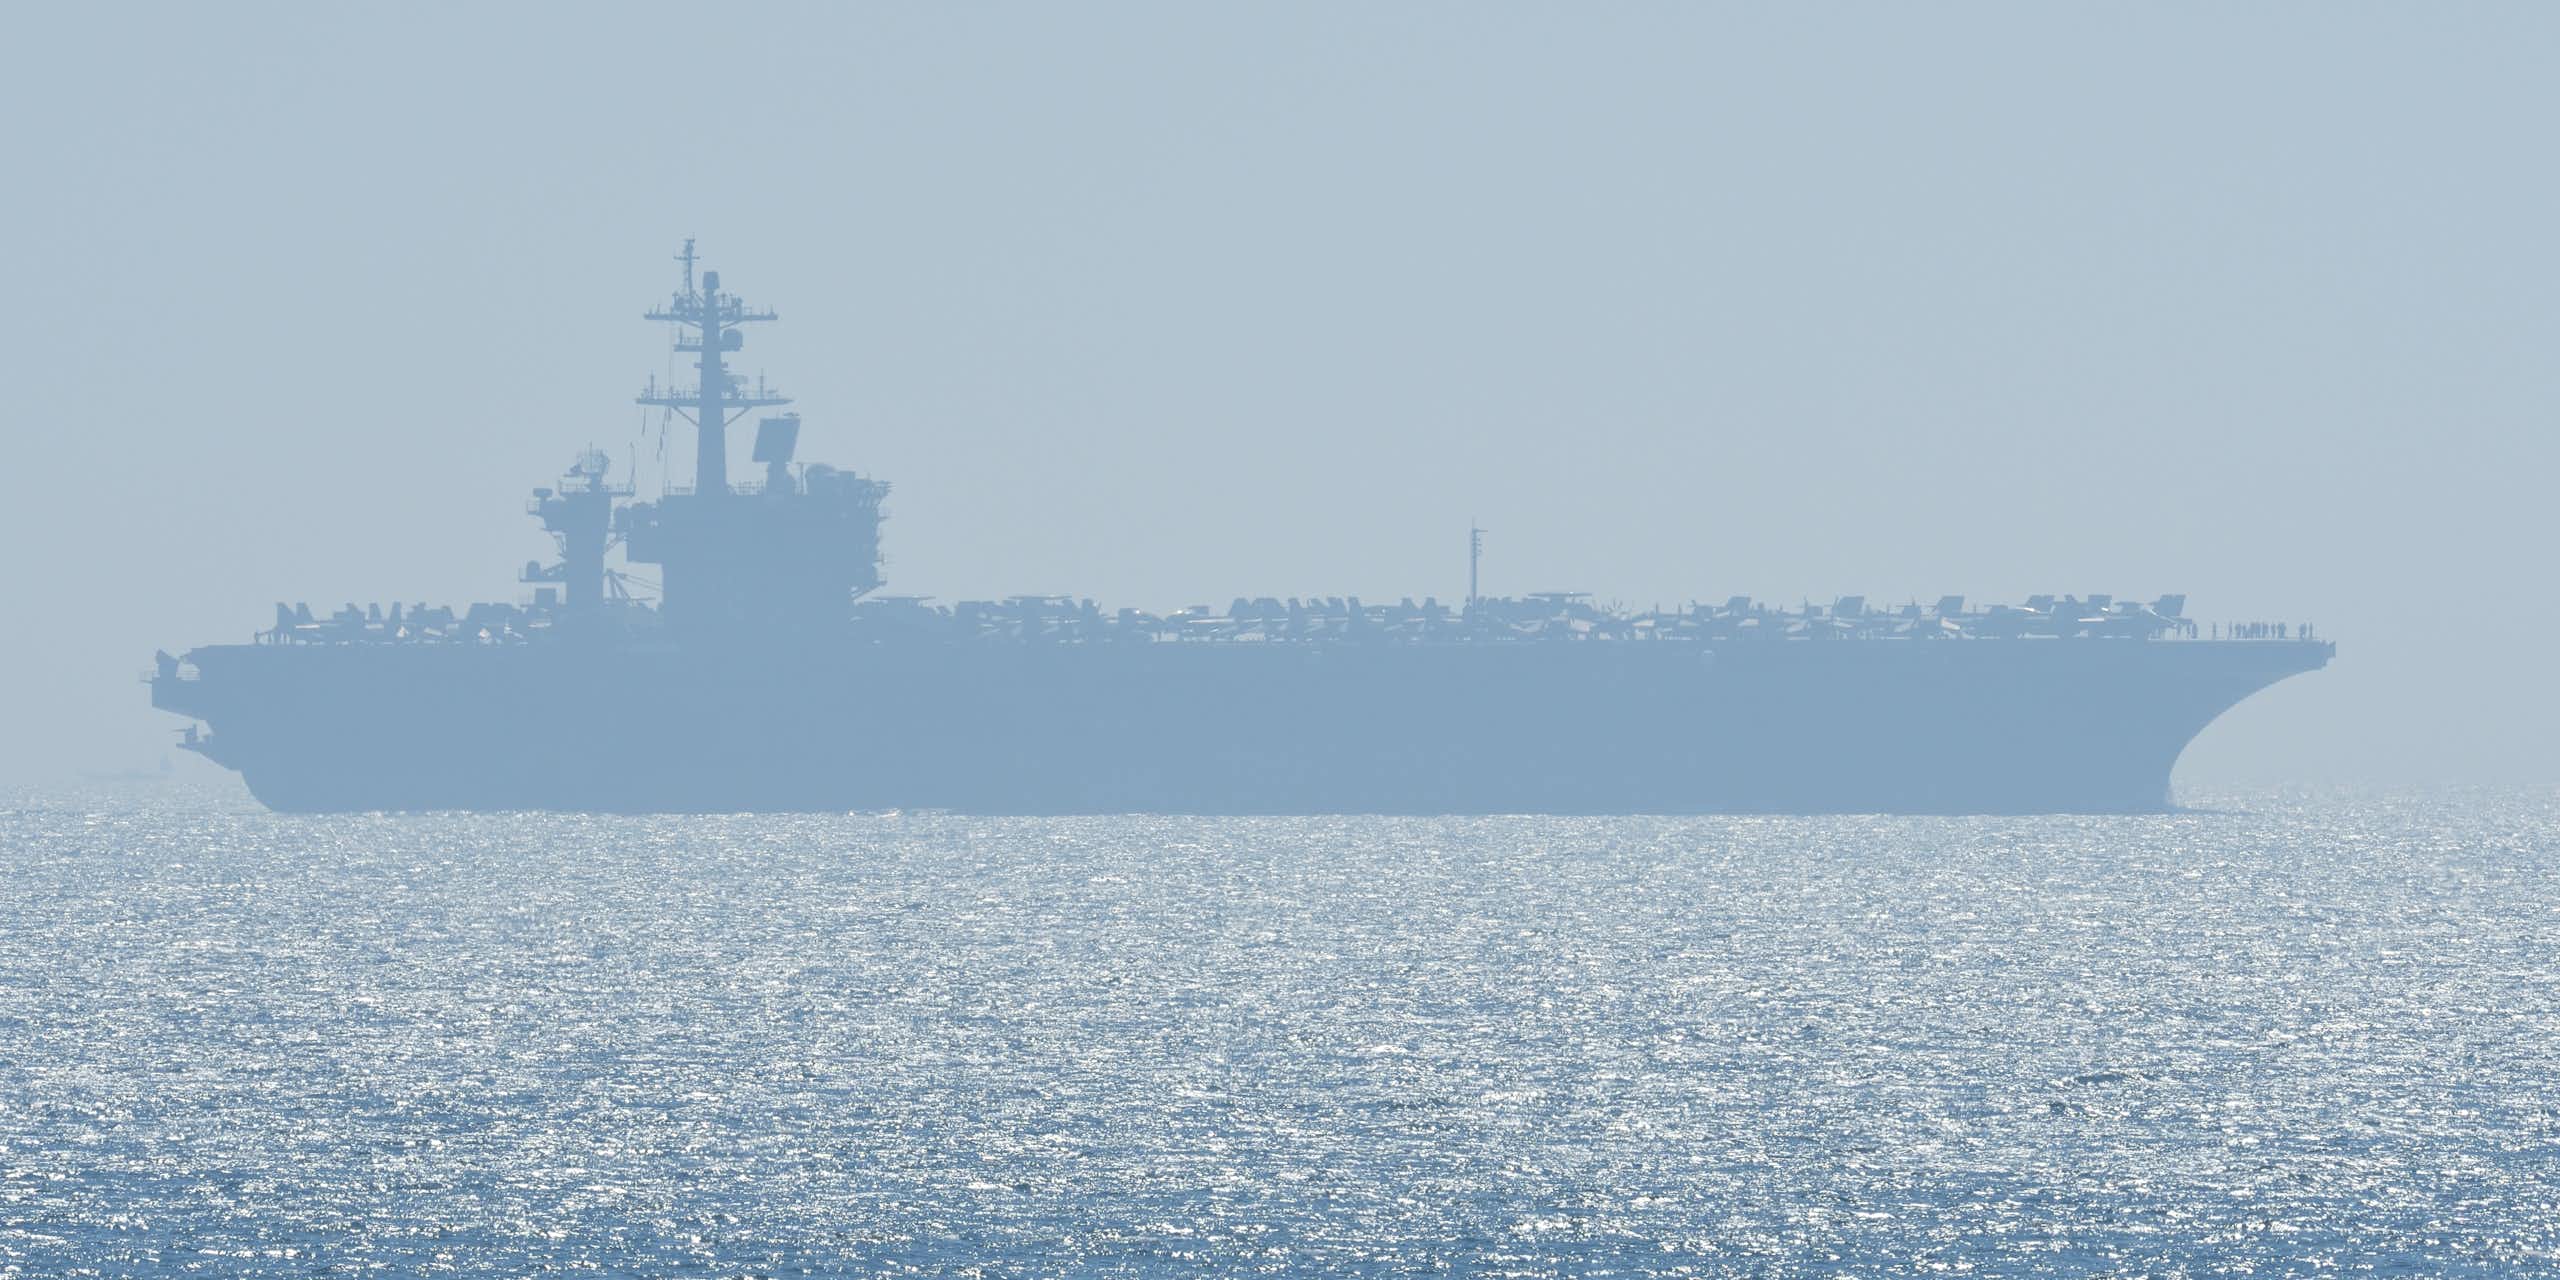 Aircraft carrier silhouetted in shimmering sea